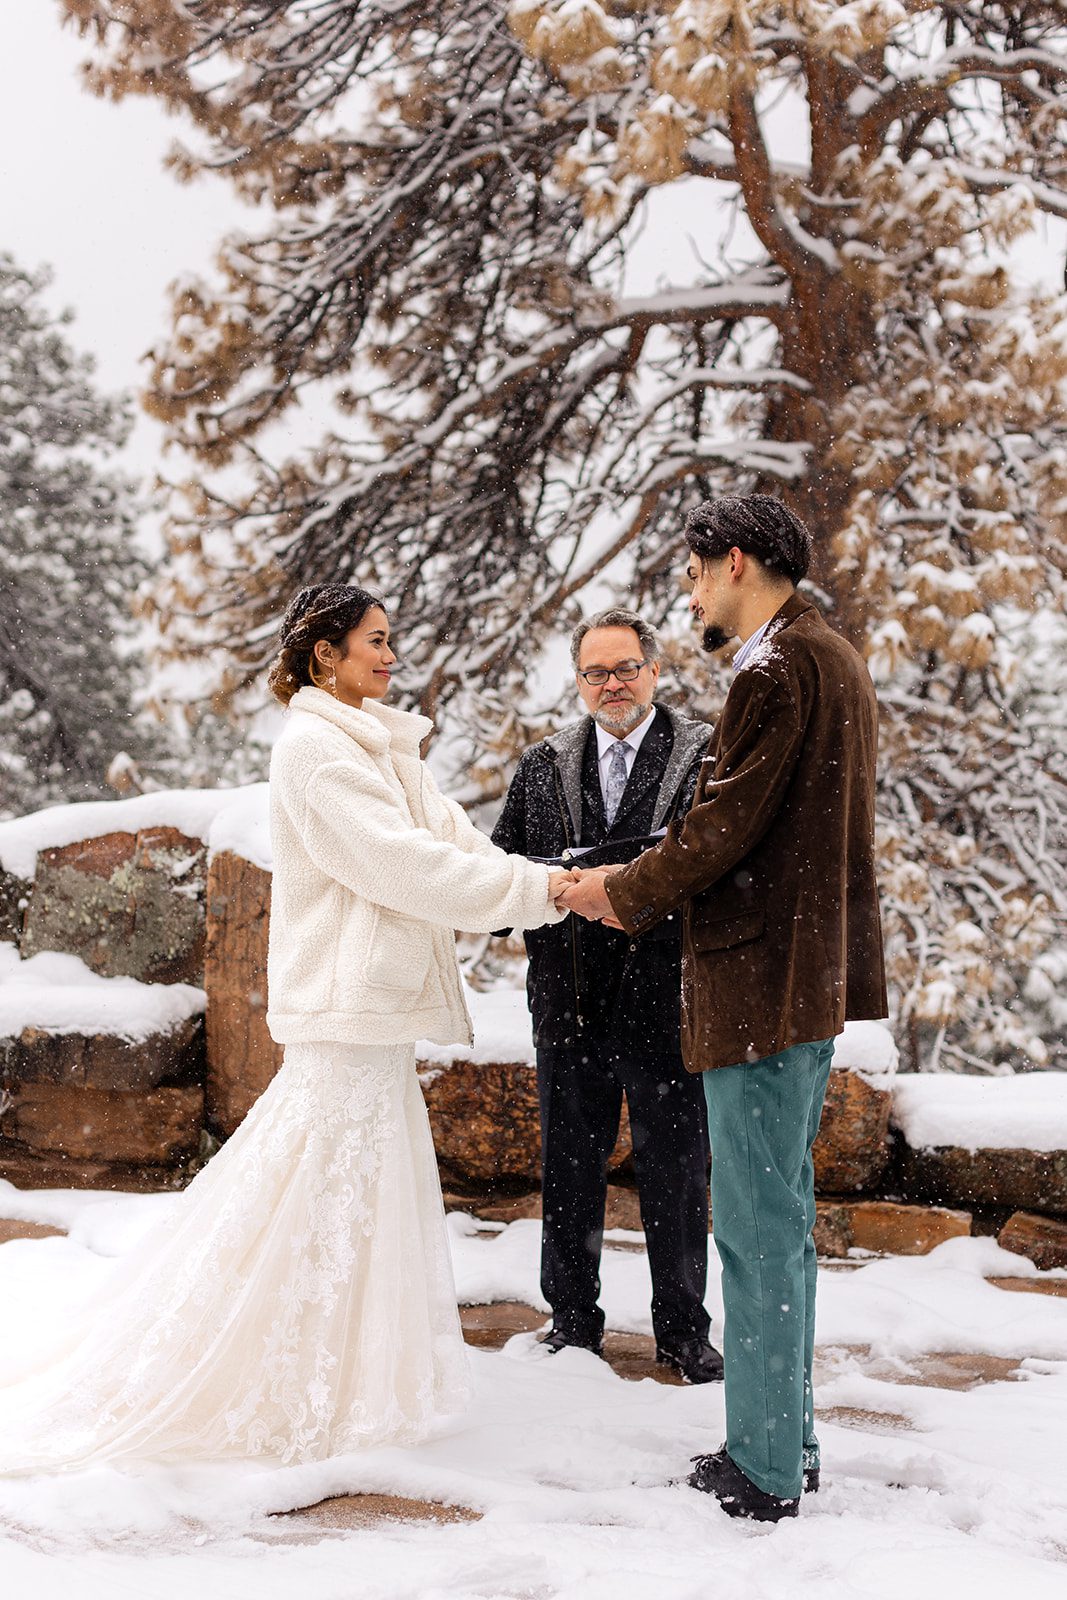 Spring snowy Halfway House elopement on Flagstaff Mountain